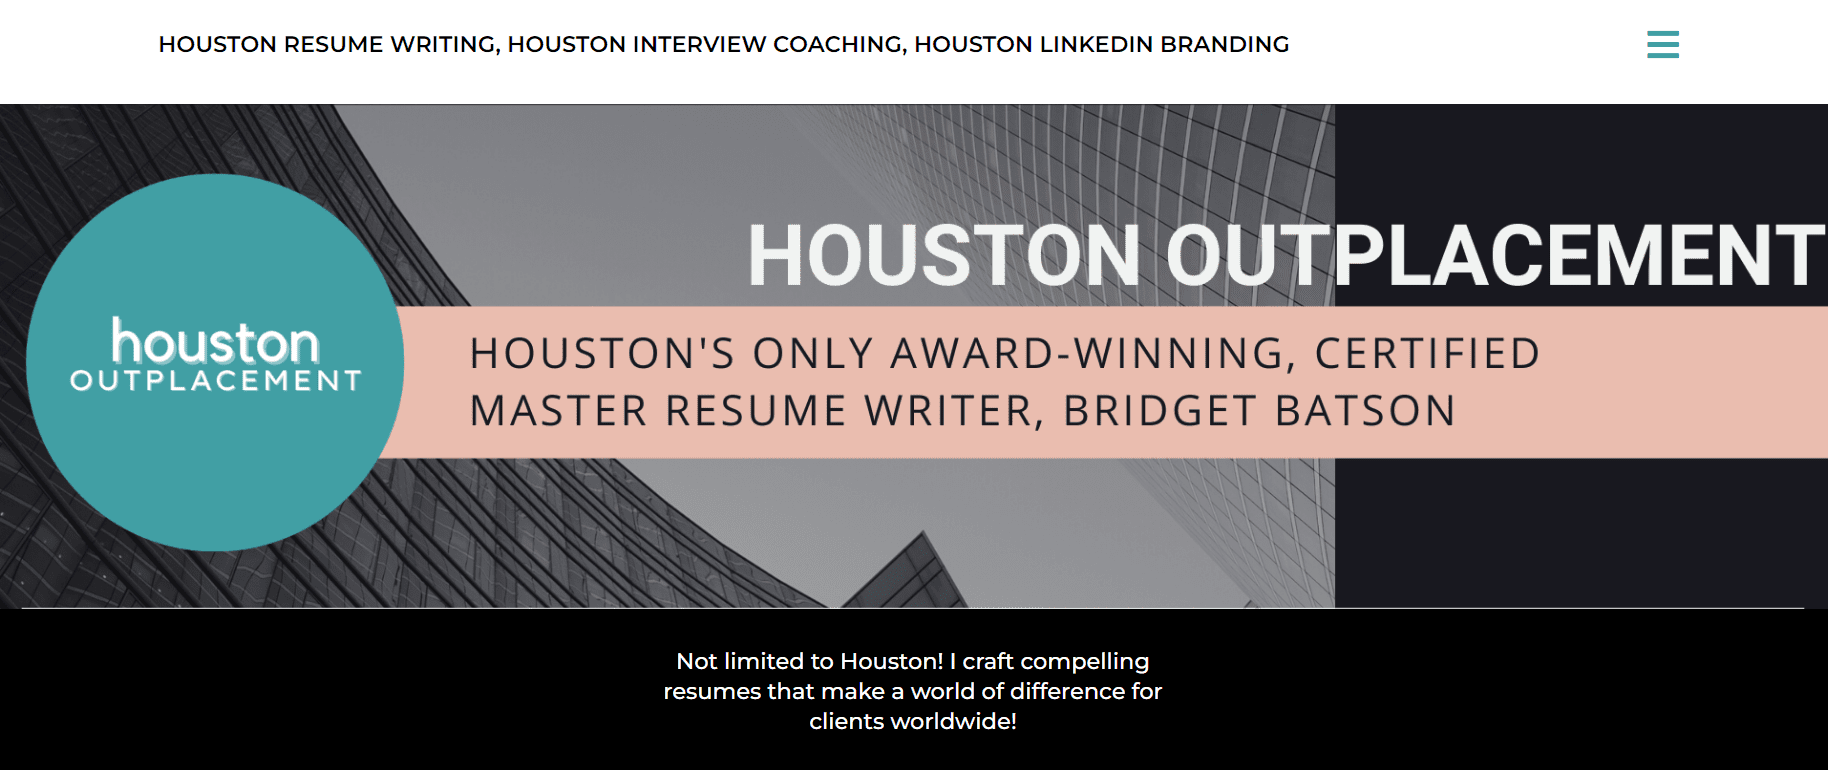 Houston Outplacement Site